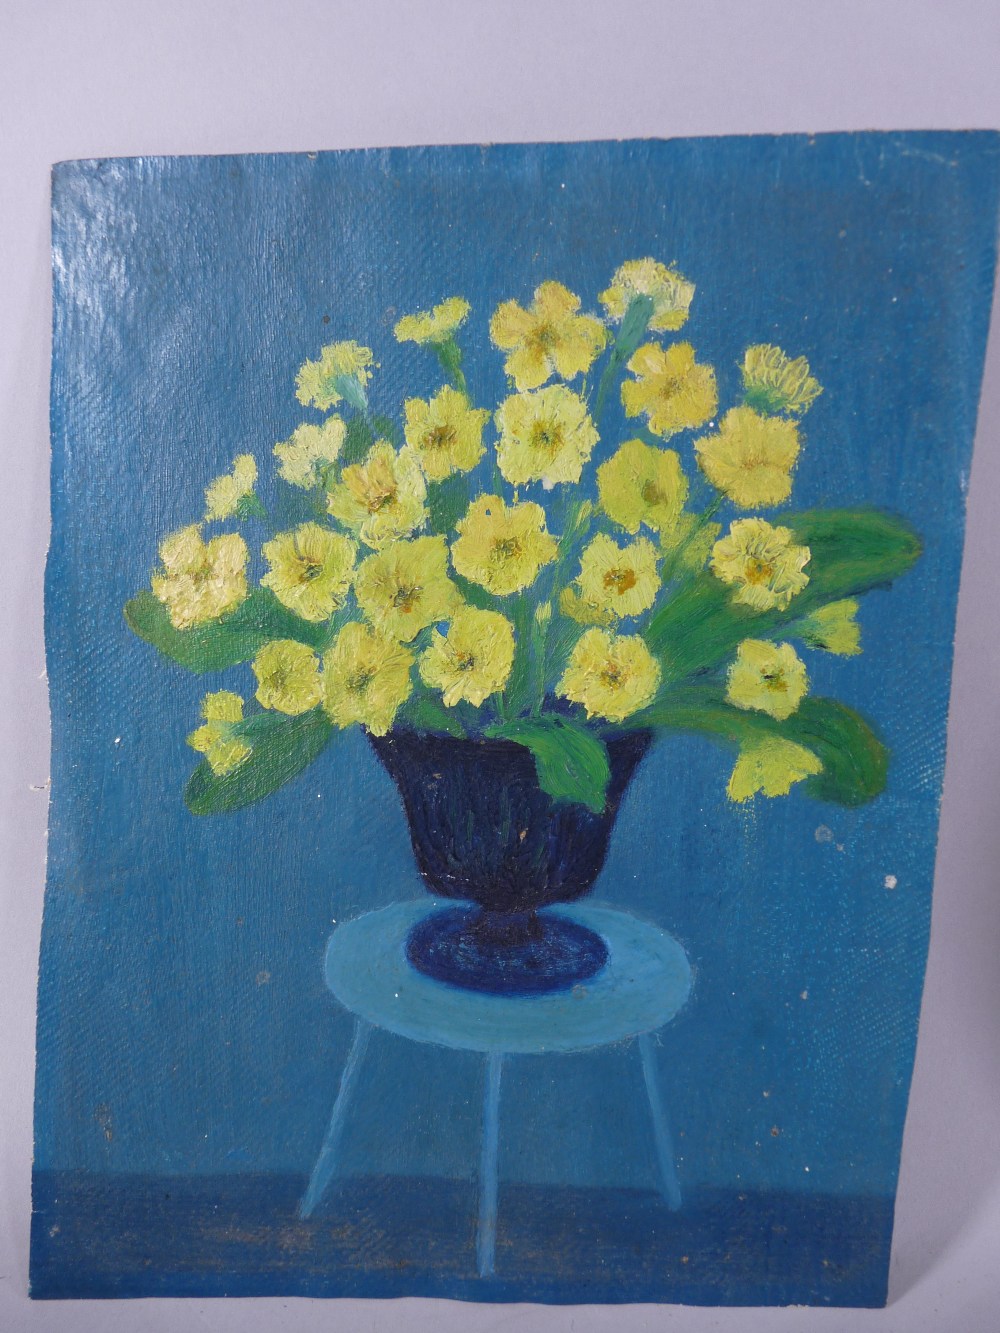 A G WILLIAMS two oils, one on board, one on canvas - still life, yellow flowers, 26 x 20 cms and - Image 5 of 9